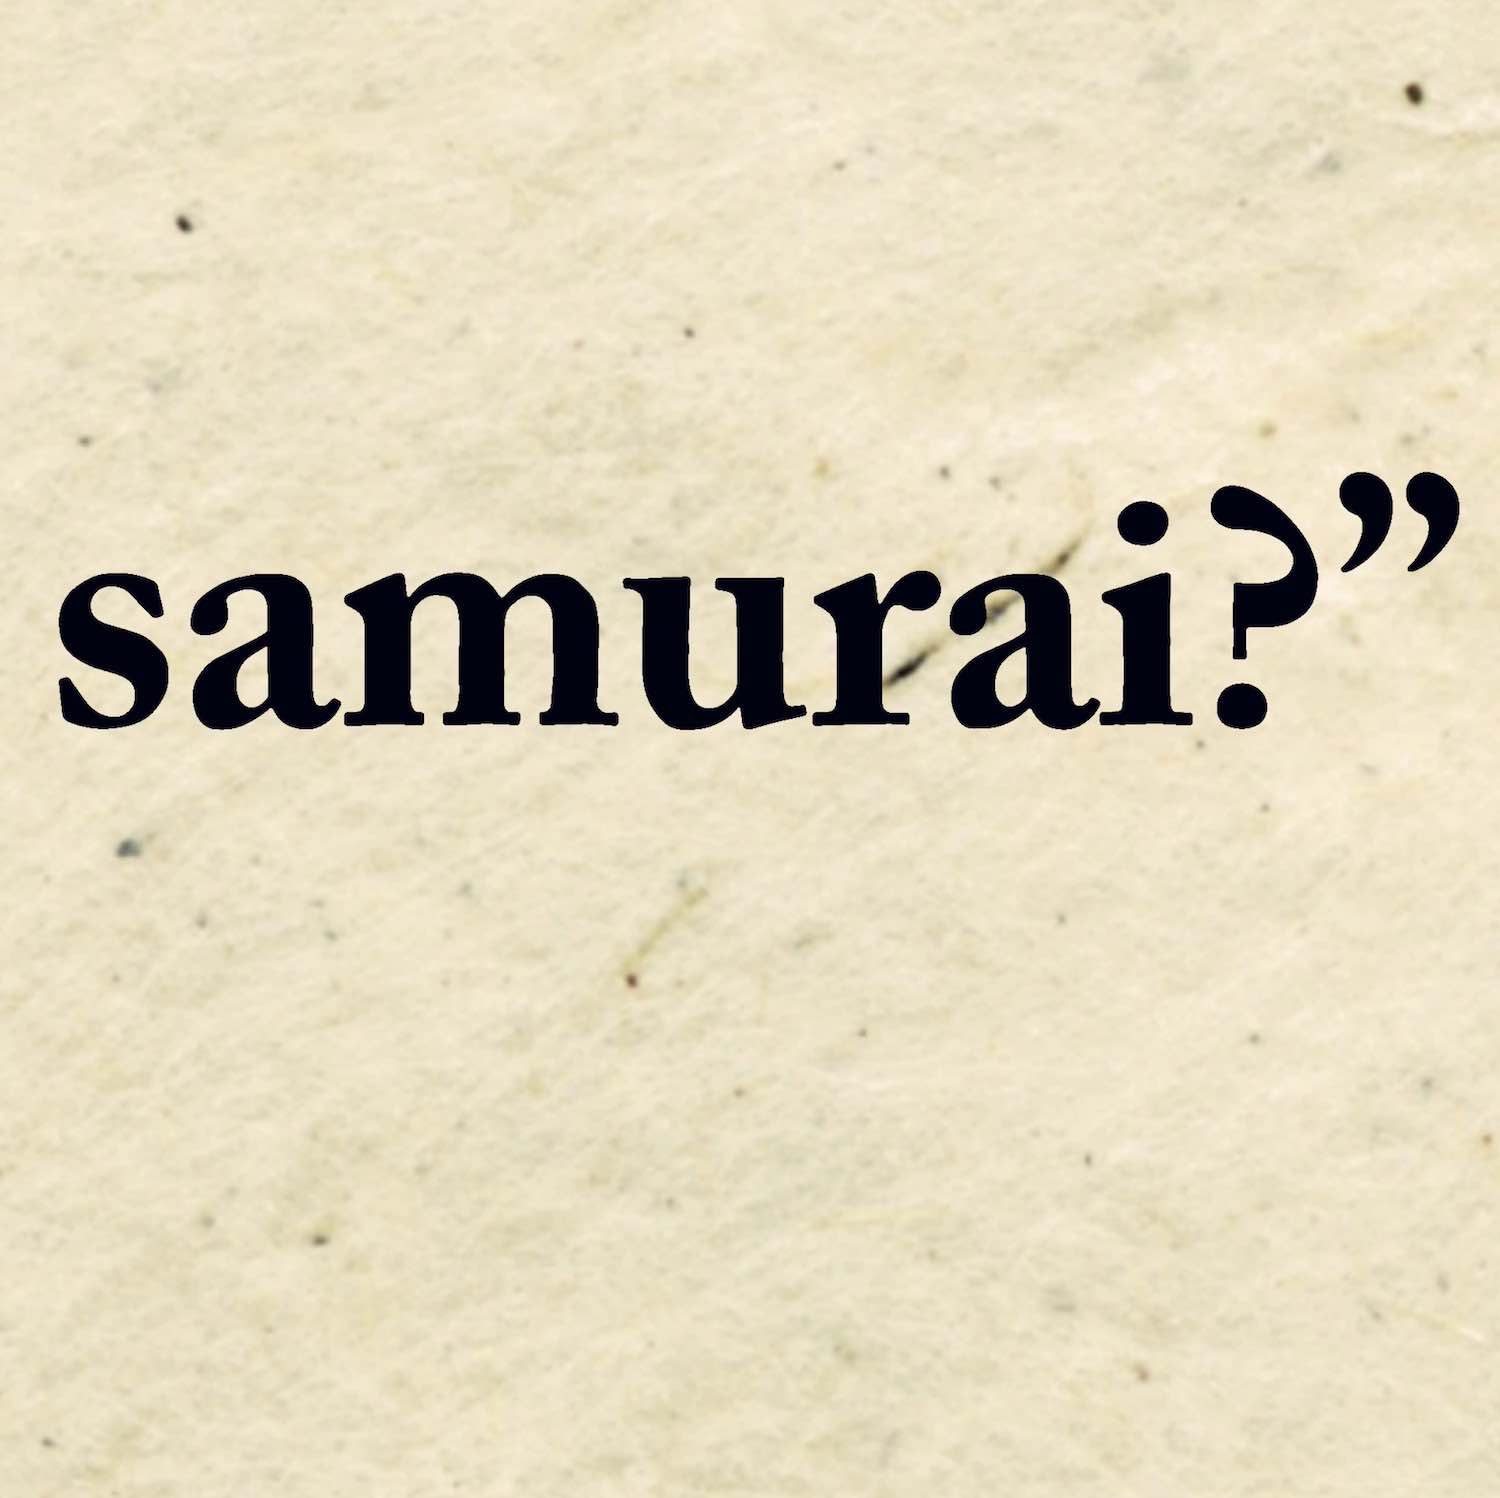 still from the trailer with the word ‘samurai?’